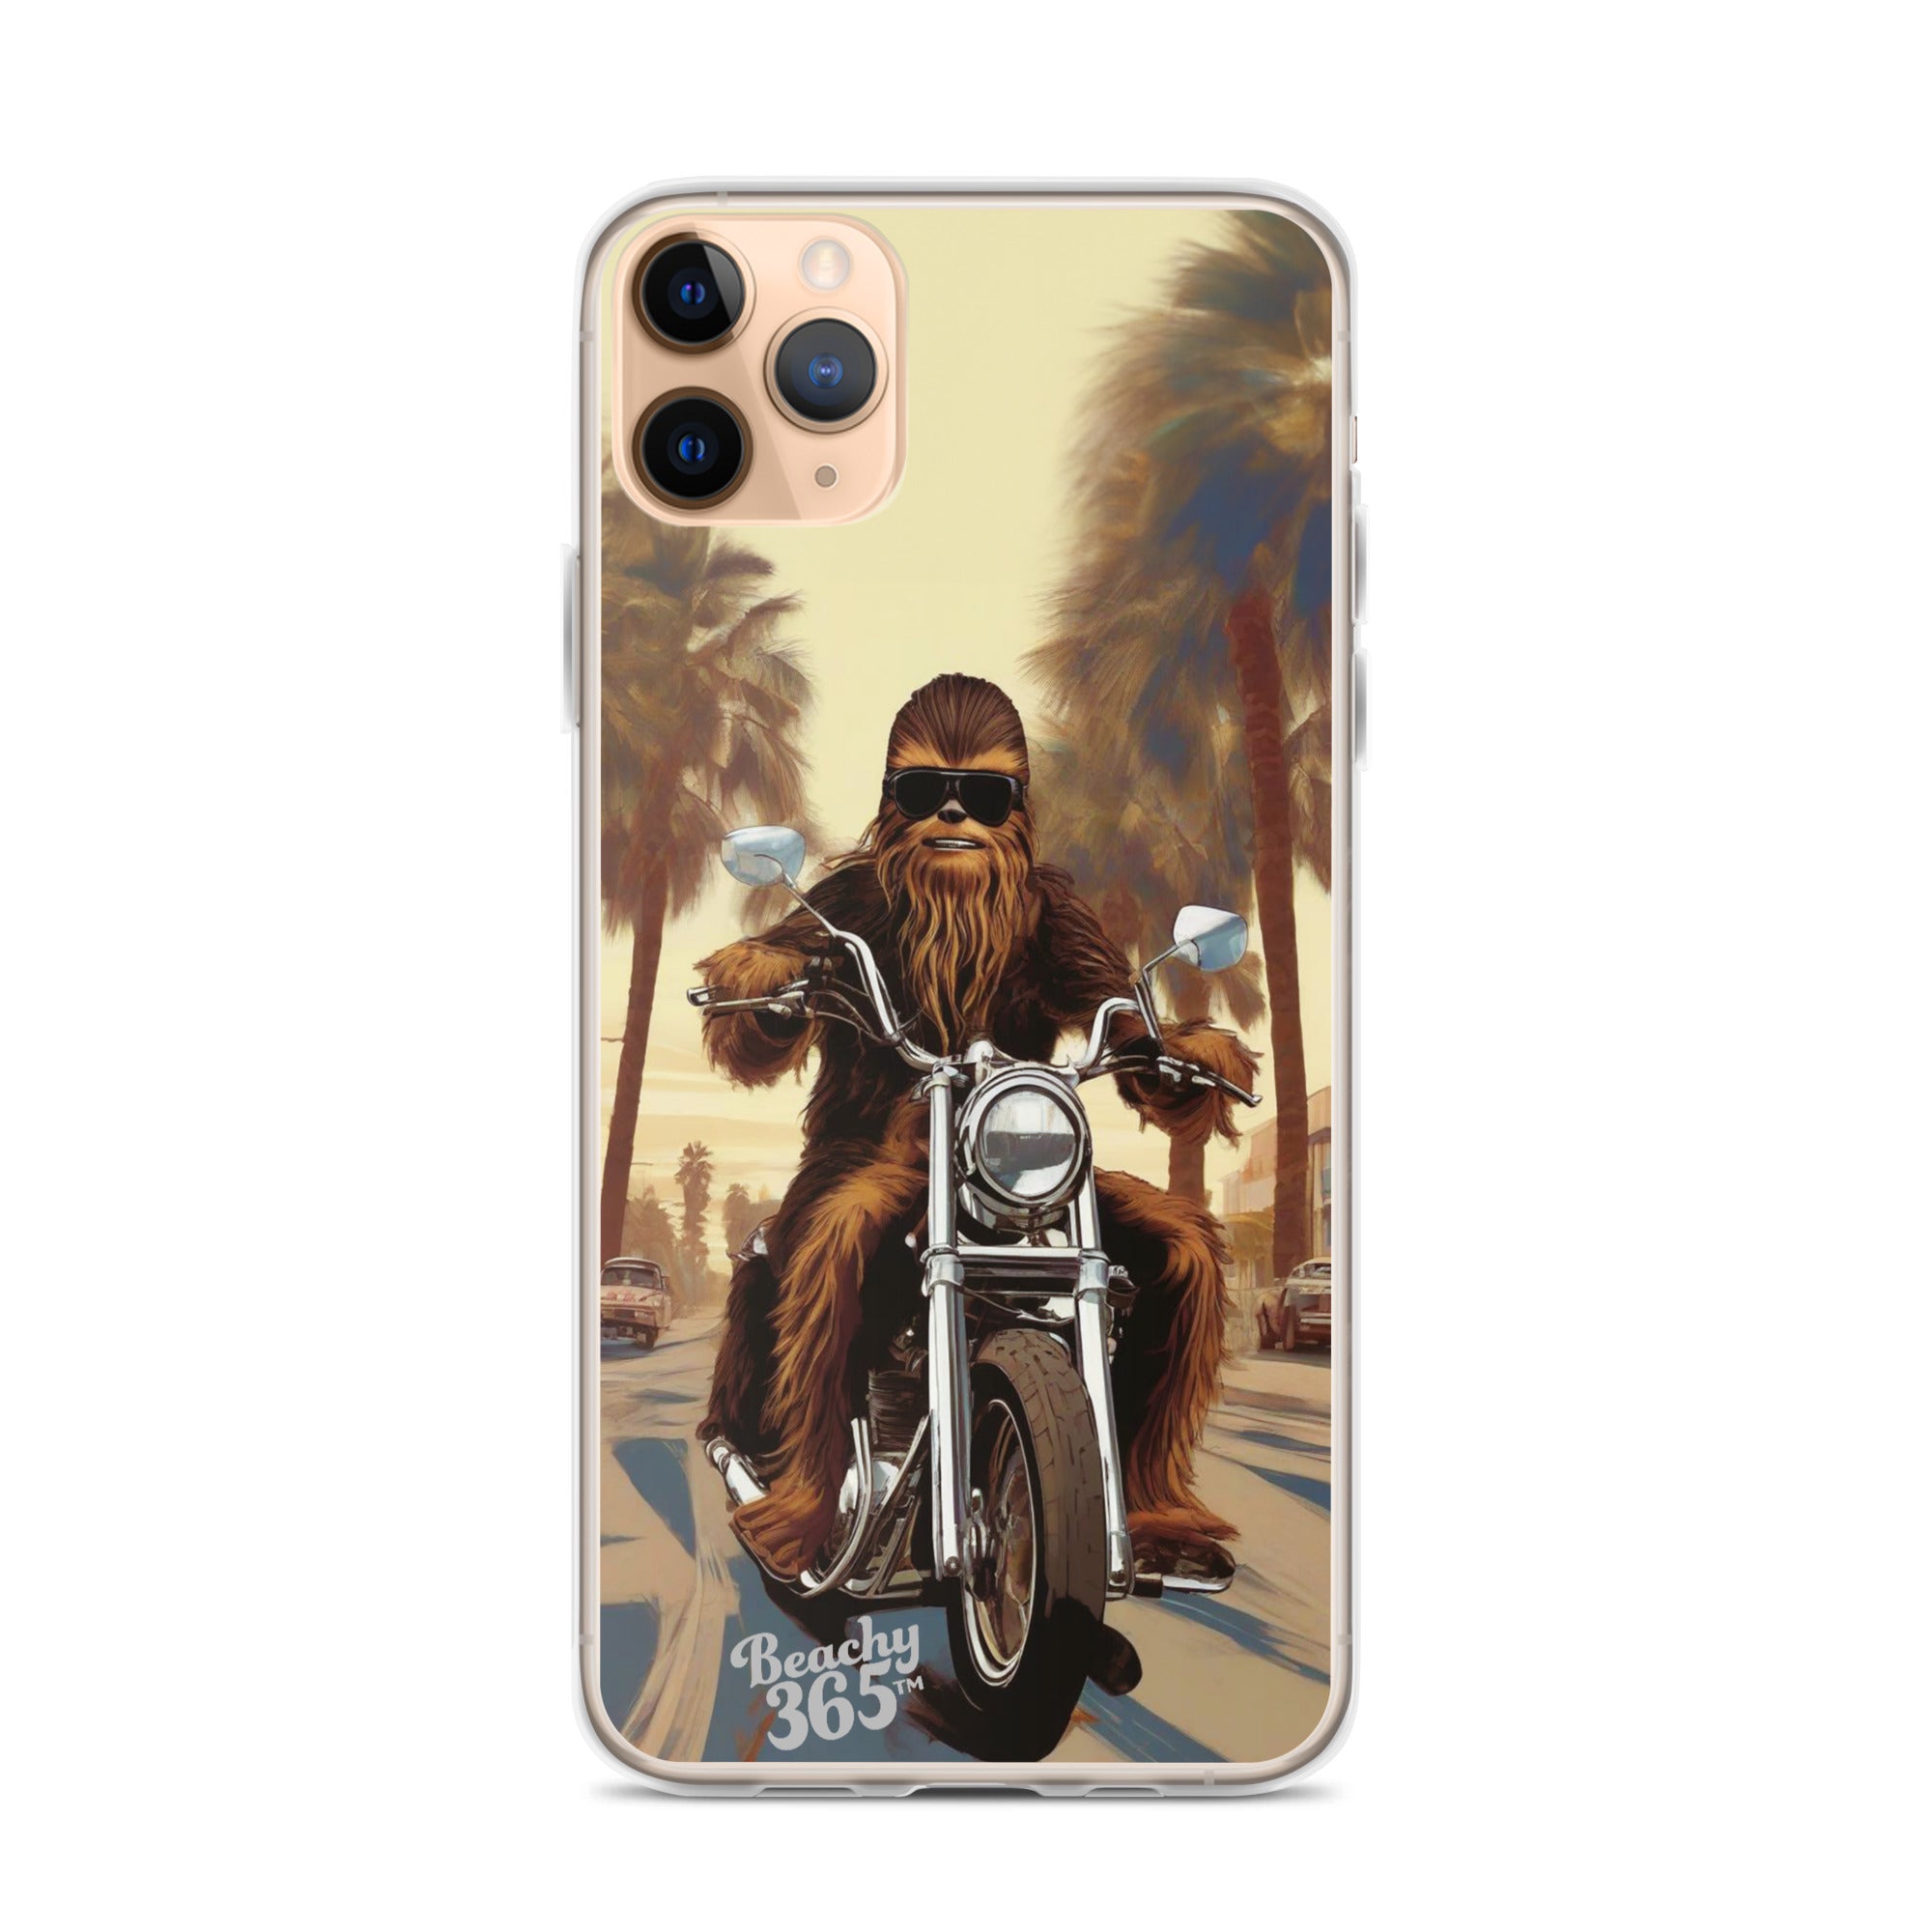 Bigfoot Riding Motorcycle at the Beach iPhone Case